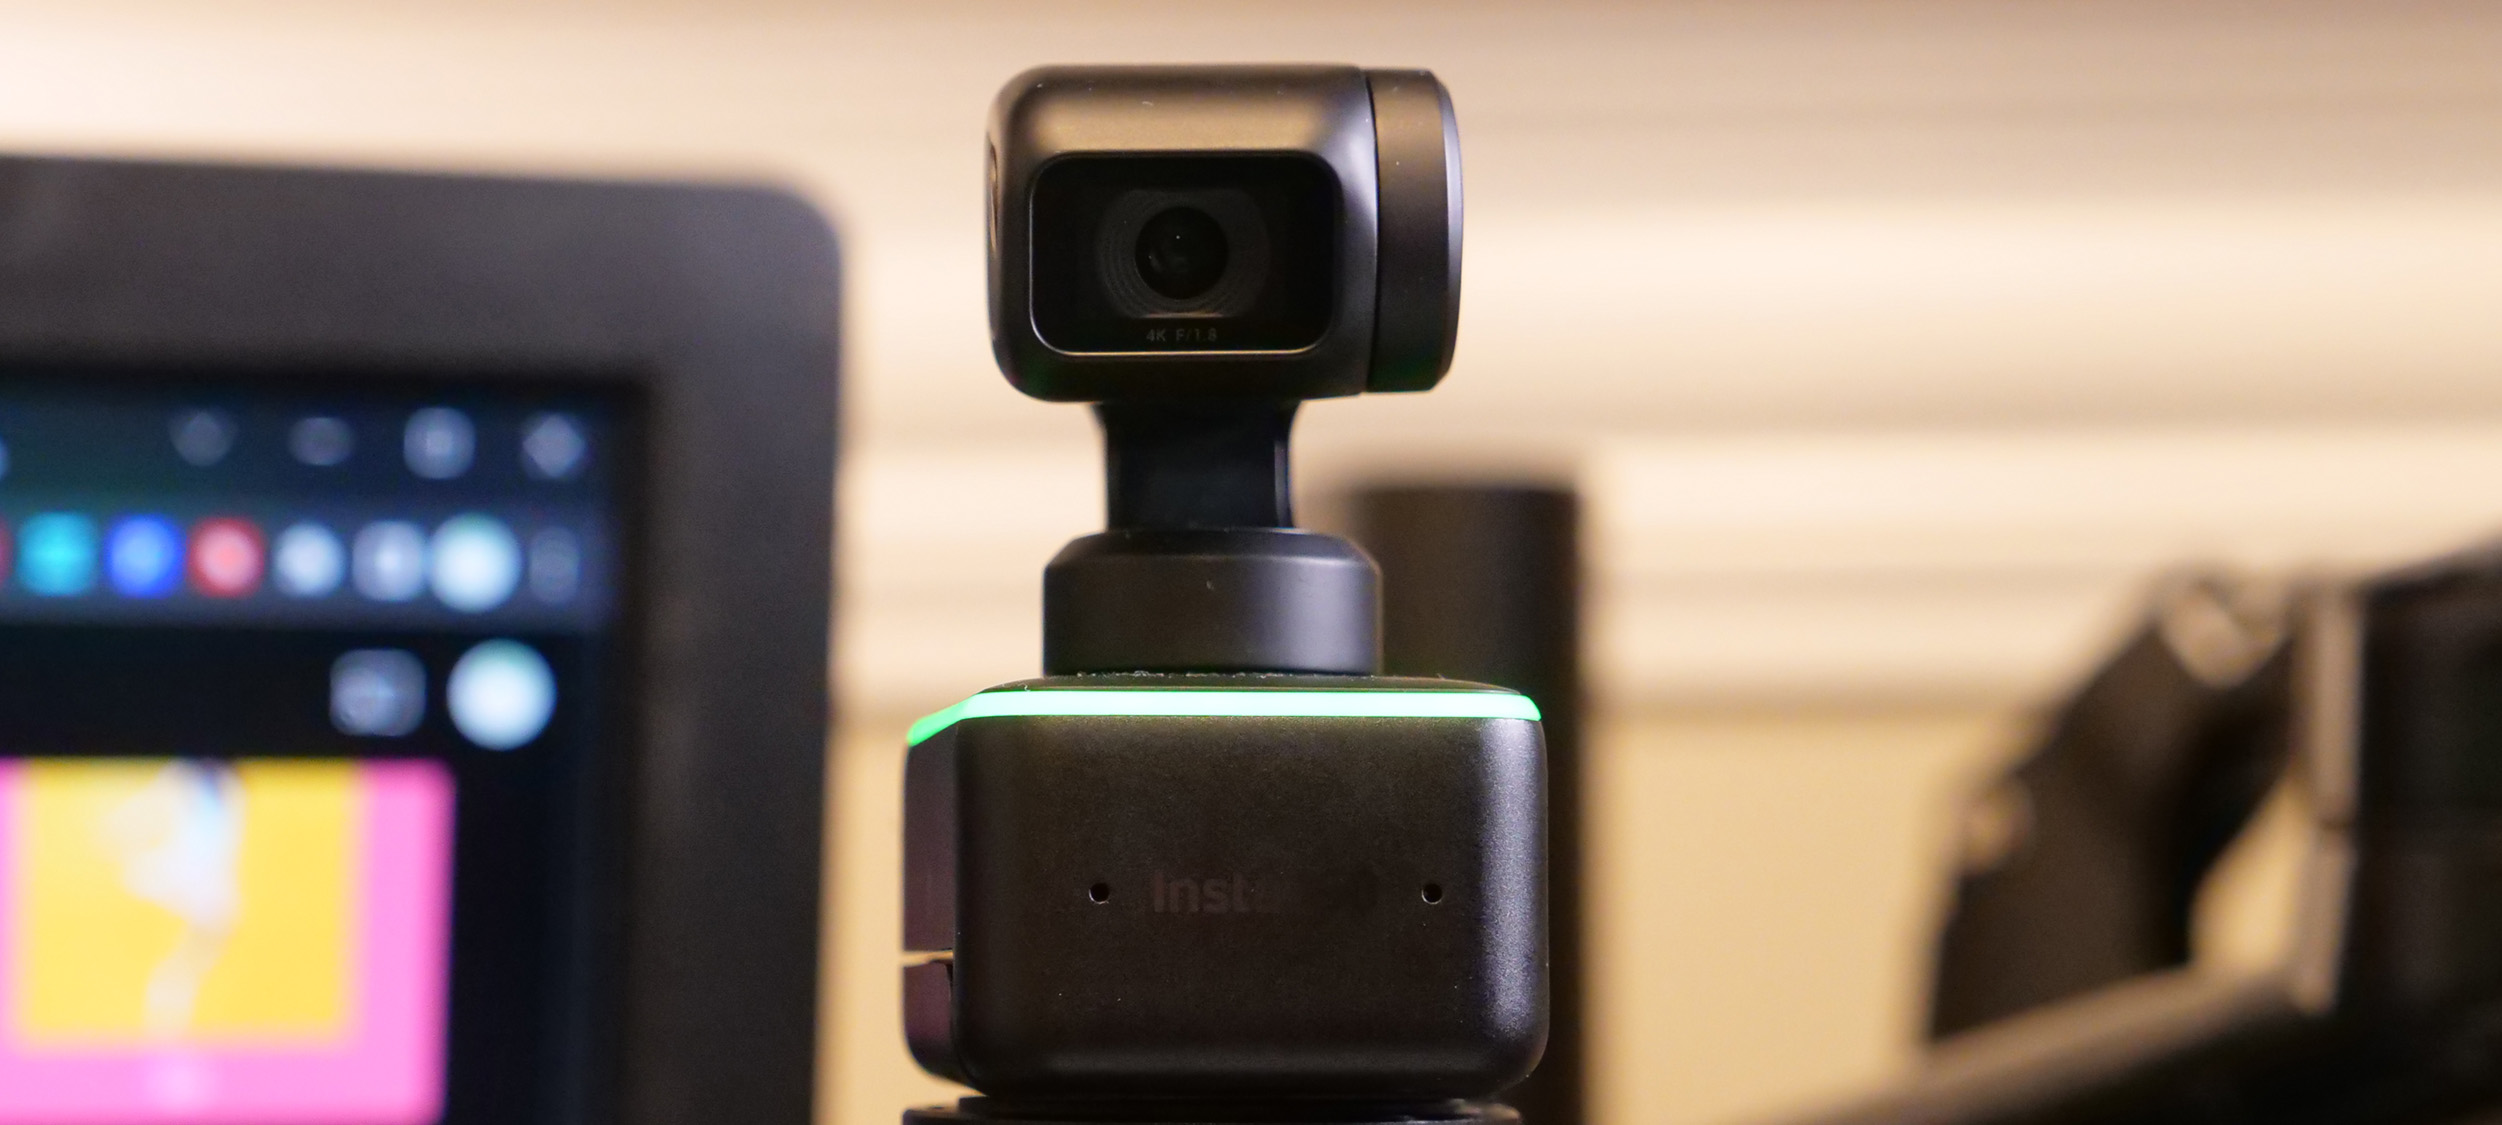 Insta360 Link webcam innovation review: Laptop Astounding | image and Mag